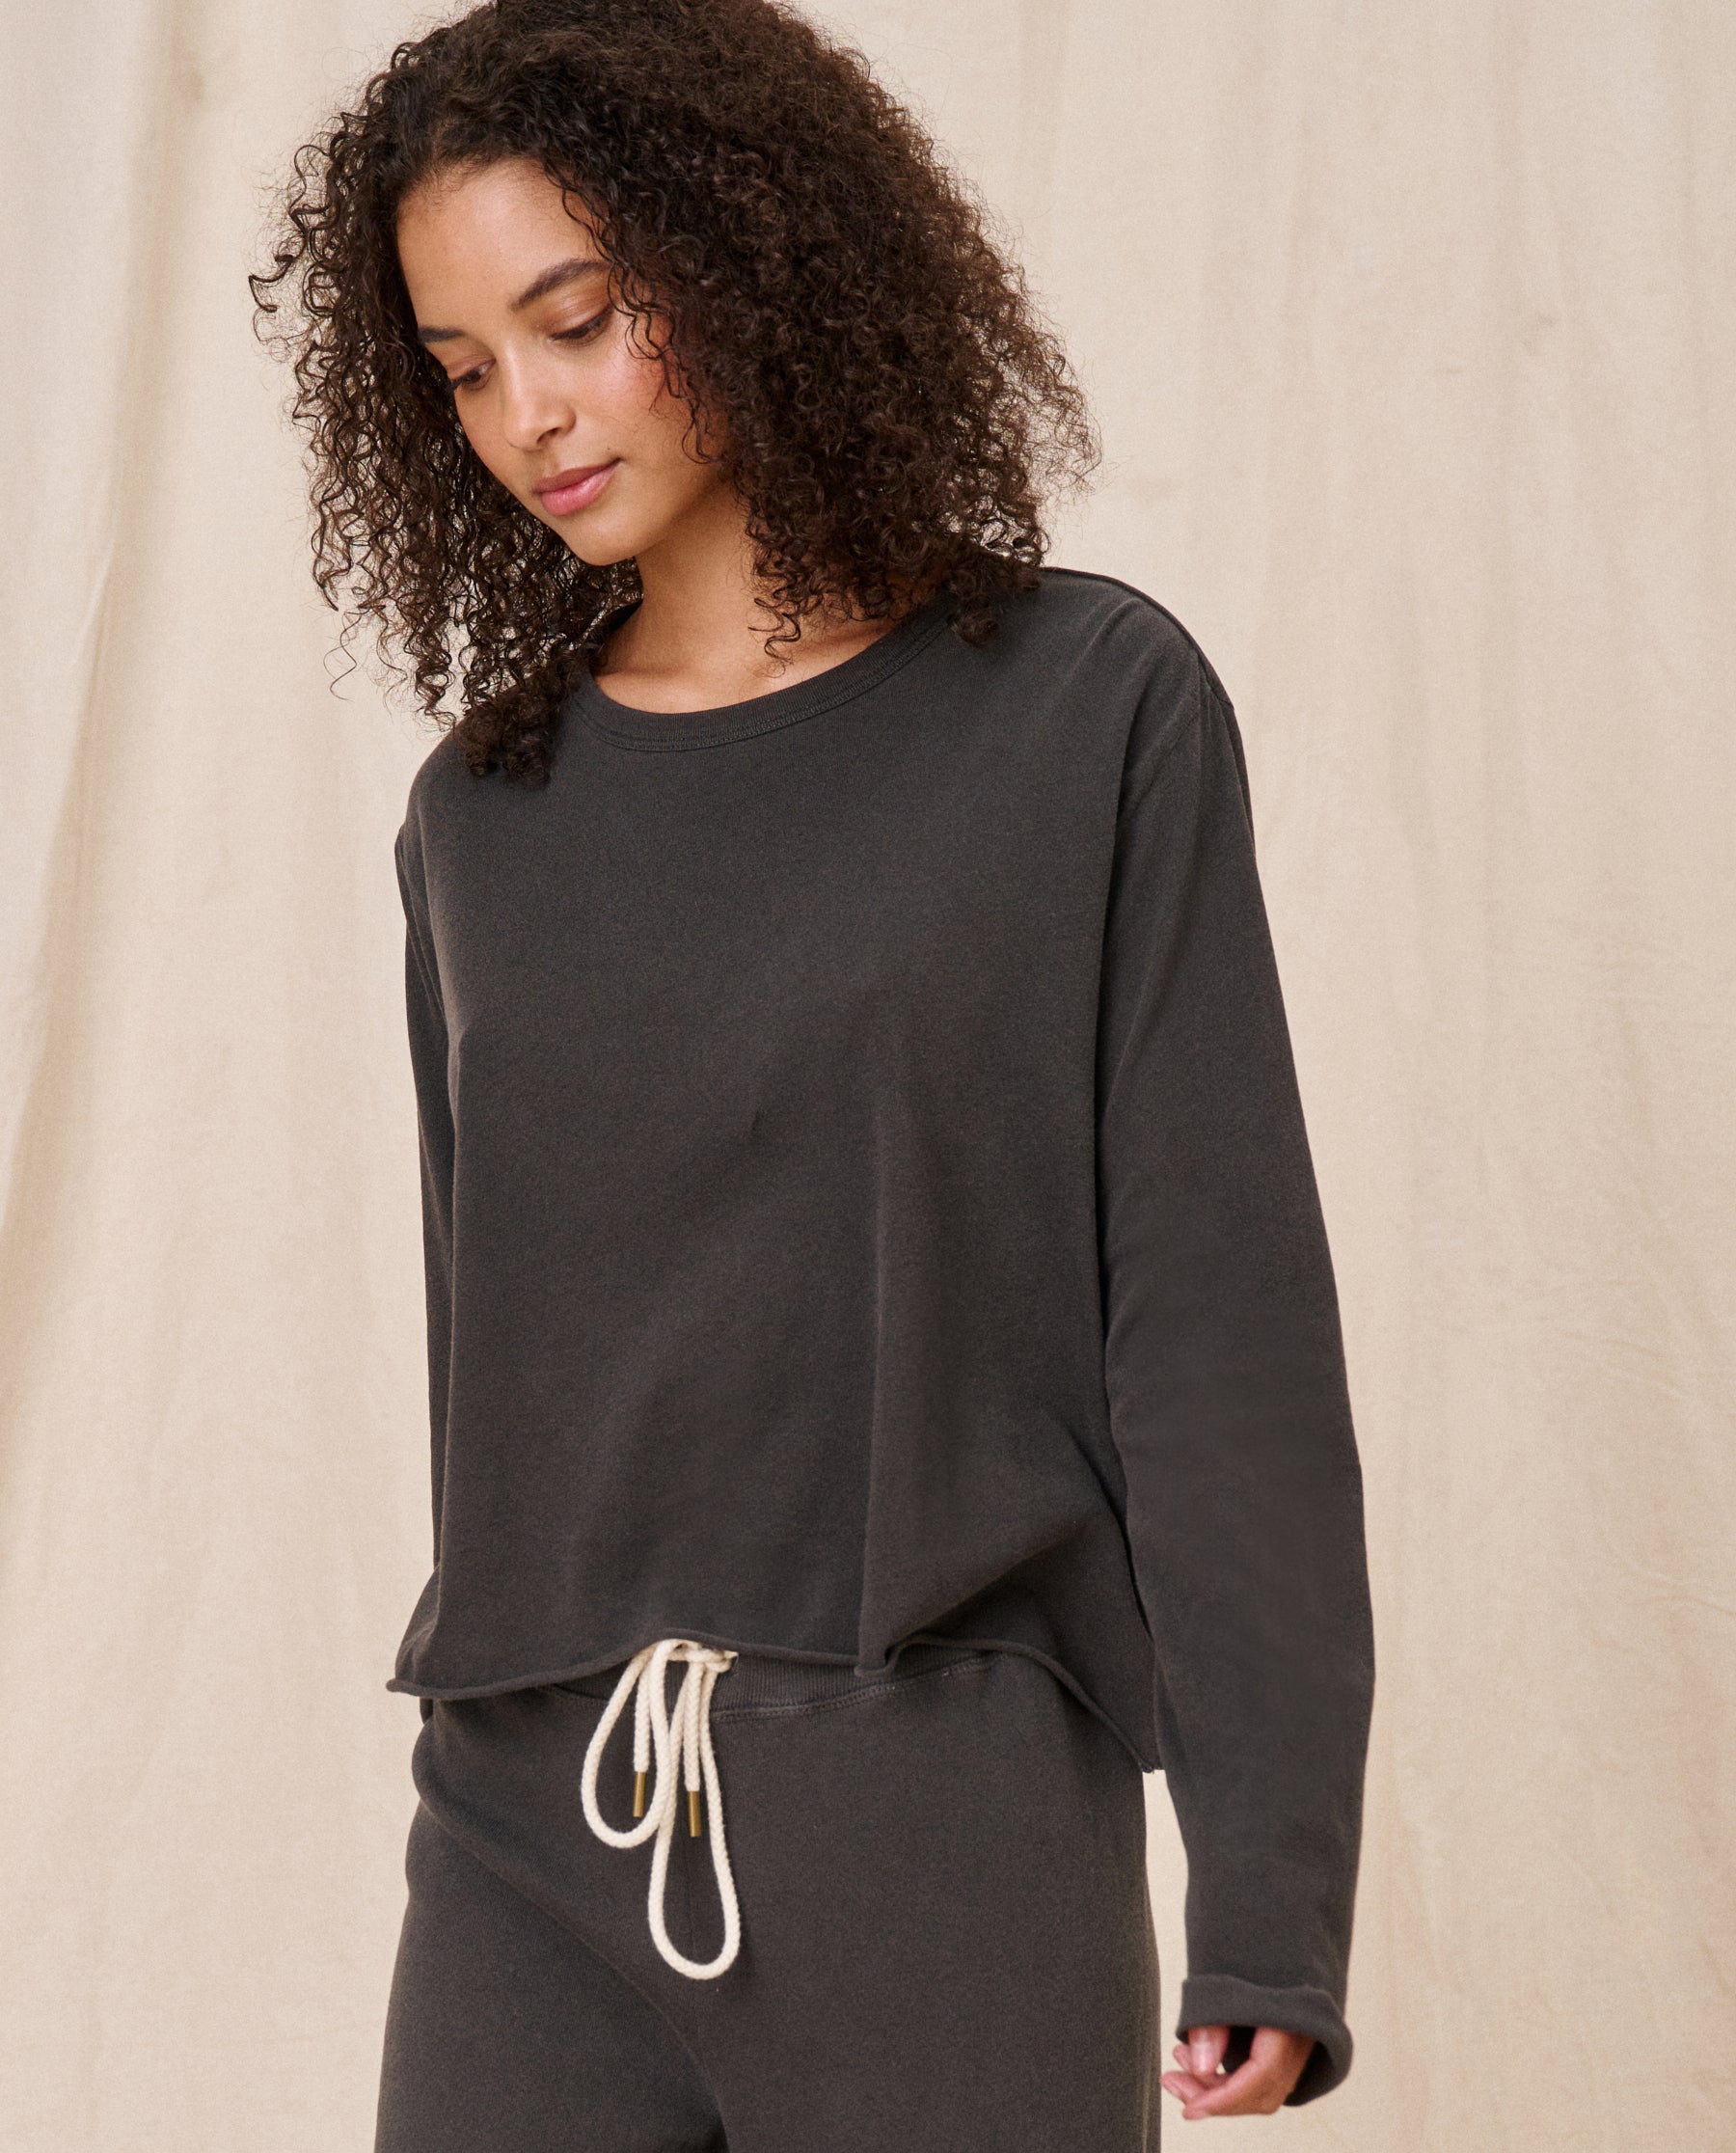 The Long Sleeve Crop Tee. - Washed Black - THE GREAT. – The Great.